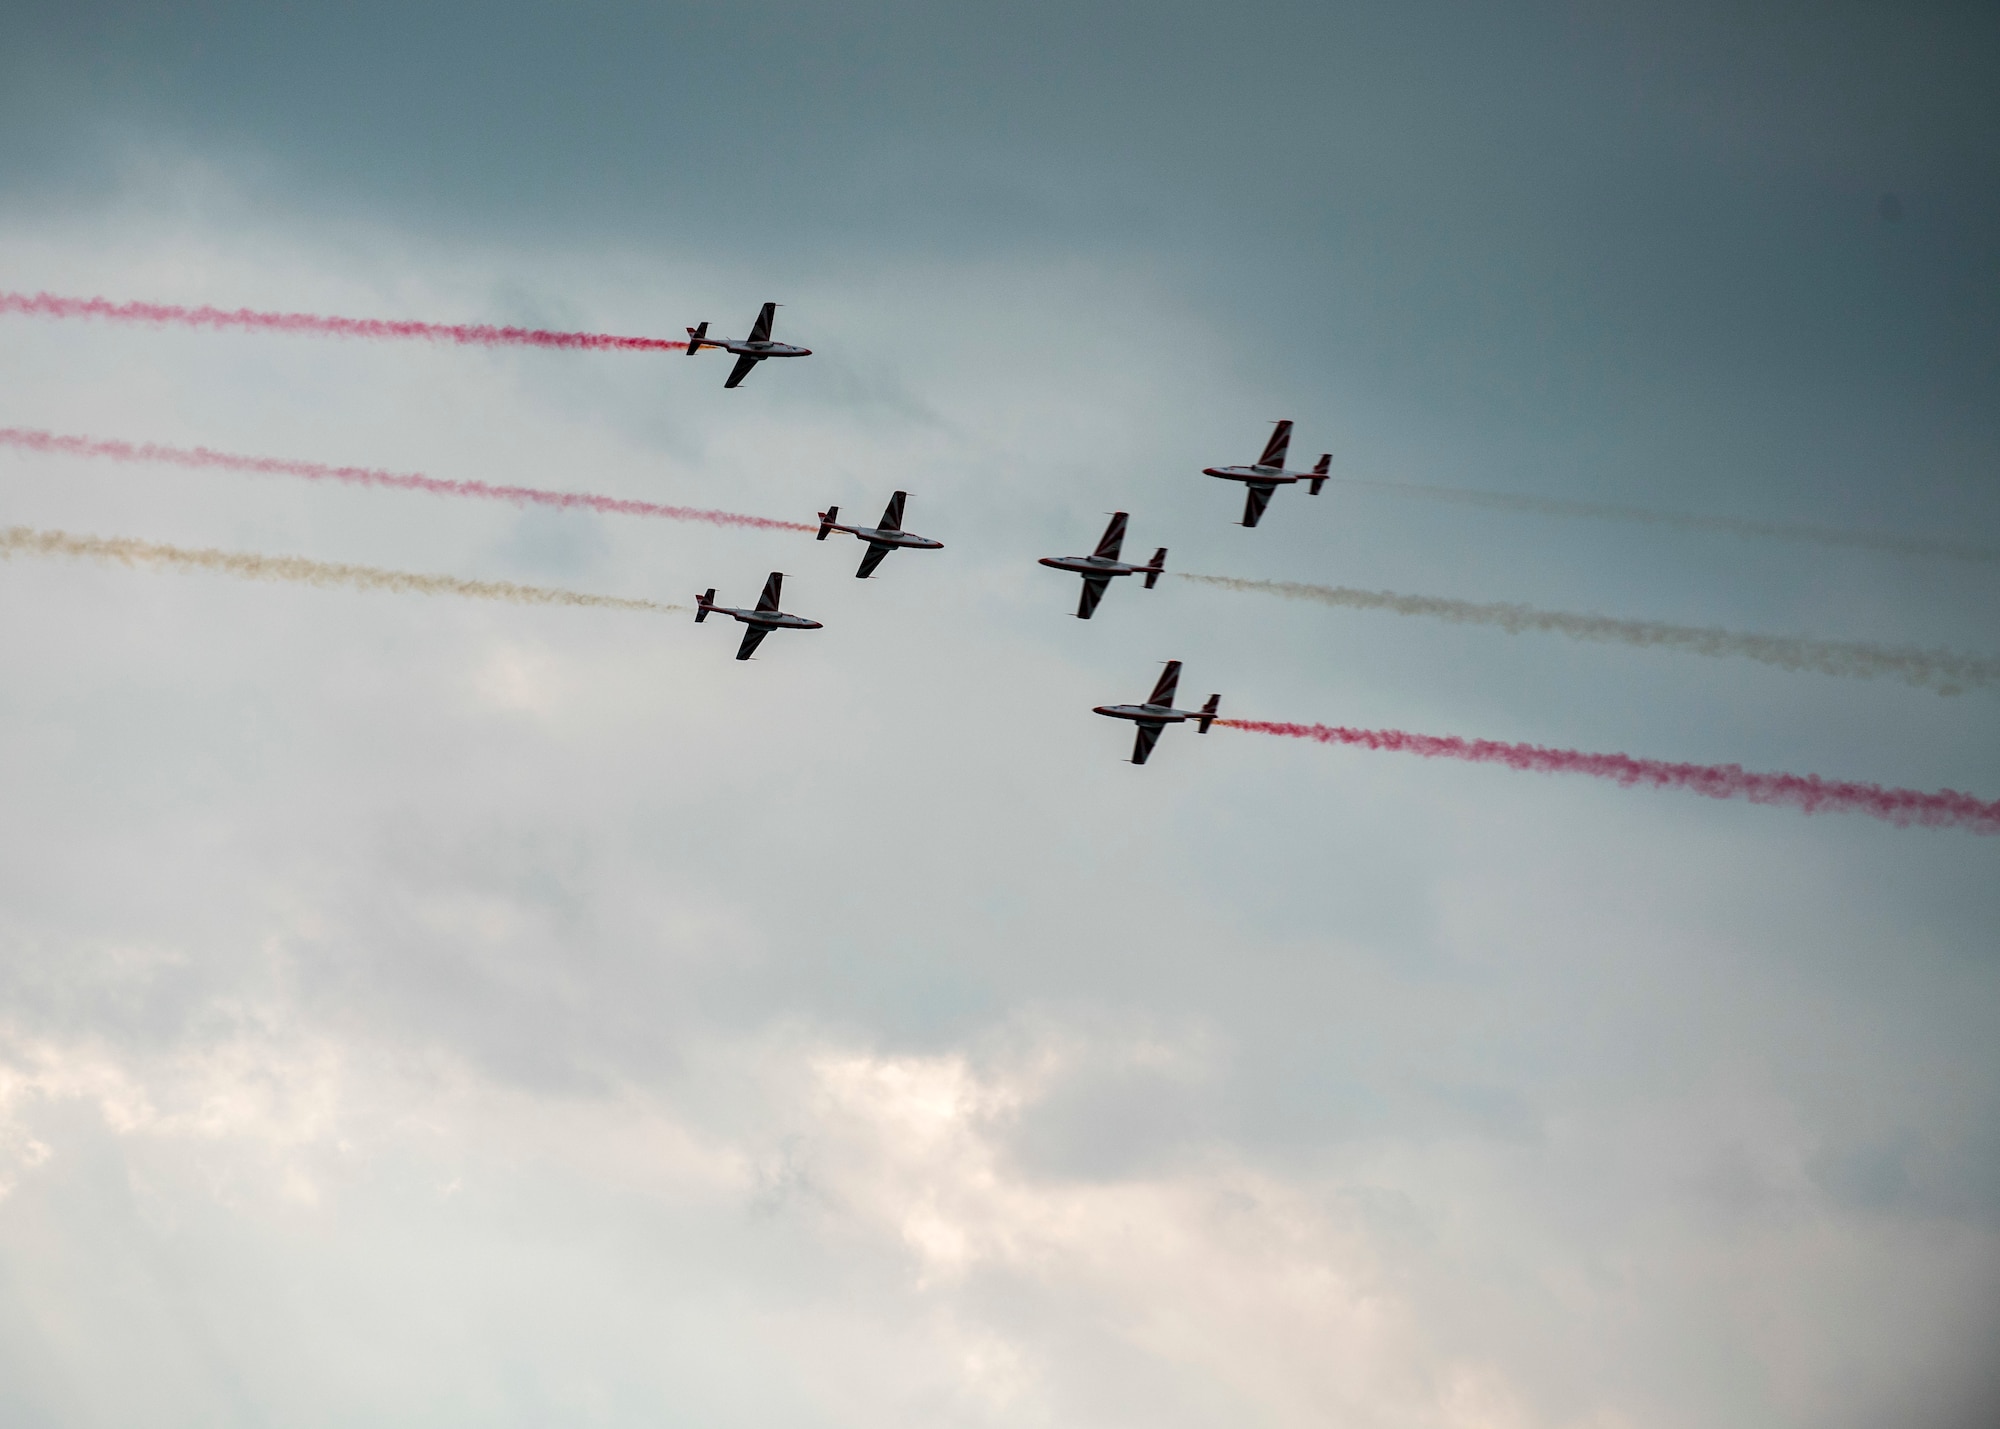 The Polish Air Force’s aerobatic demonstration team, “White-Red Sparks”, performs a “close pass” drill above Ostrava Air Base, Czech Republic, during NATO Days. NATO Days is a Czech Republic-led air show and exhibition that showcases military ground and aviation capabilities from 19 nations. Participation in NATO Days increases our understanding of European ally and partner capabilities, greatly enhancing our ability to operate together as a team. (U.S. Navy photo by Mass Communication Specialist 2nd Class Robert J. Baldock)